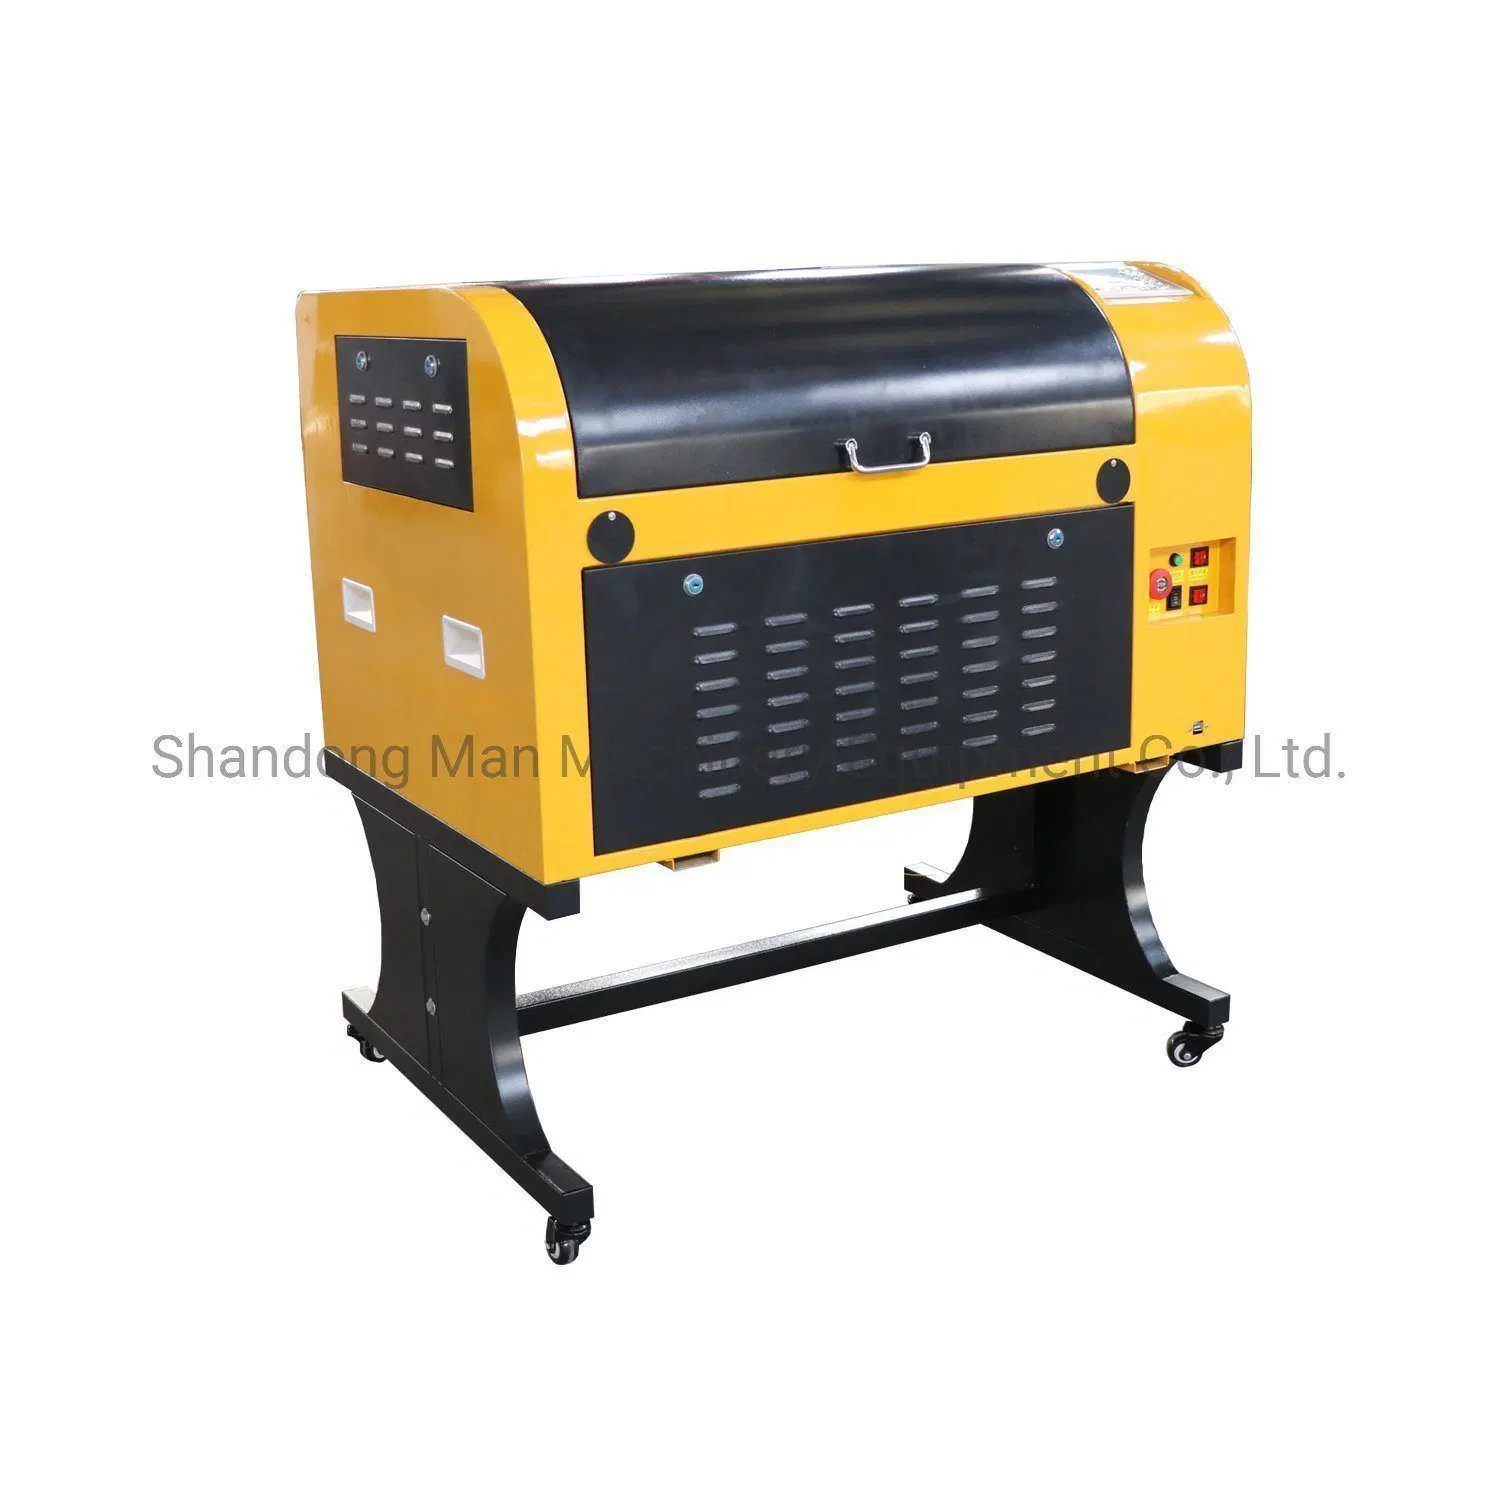 100W Professional New Function CO2 Laser Cutting Engraving Equipment for Non-Metal